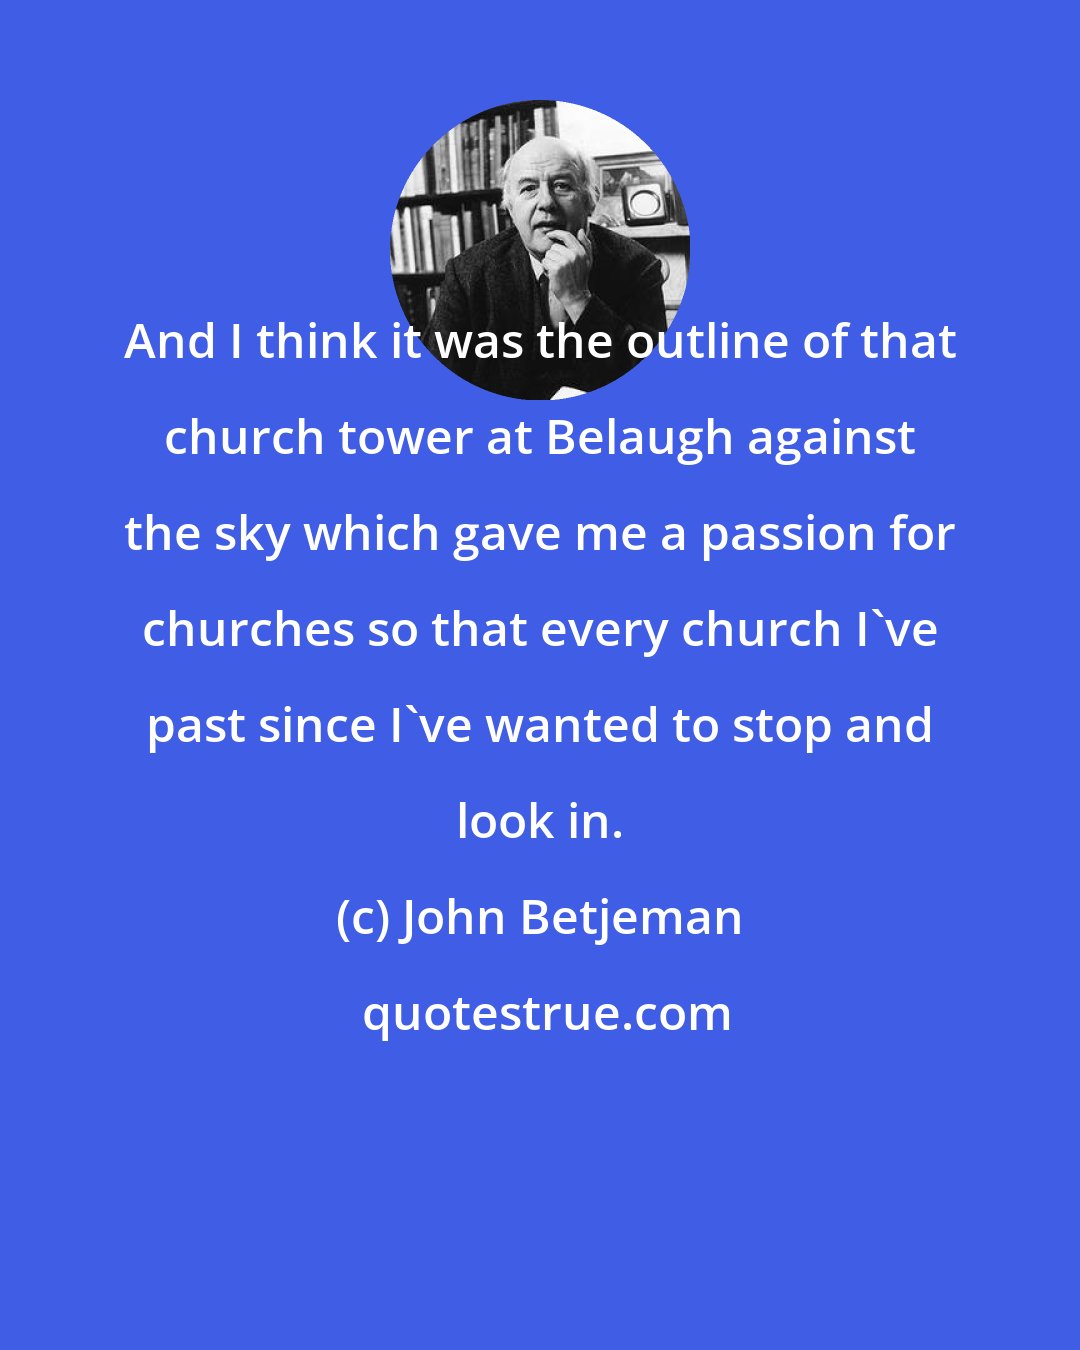 John Betjeman: And I think it was the outline of that church tower at Belaugh against the sky which gave me a passion for churches so that every church I've past since I've wanted to stop and look in.